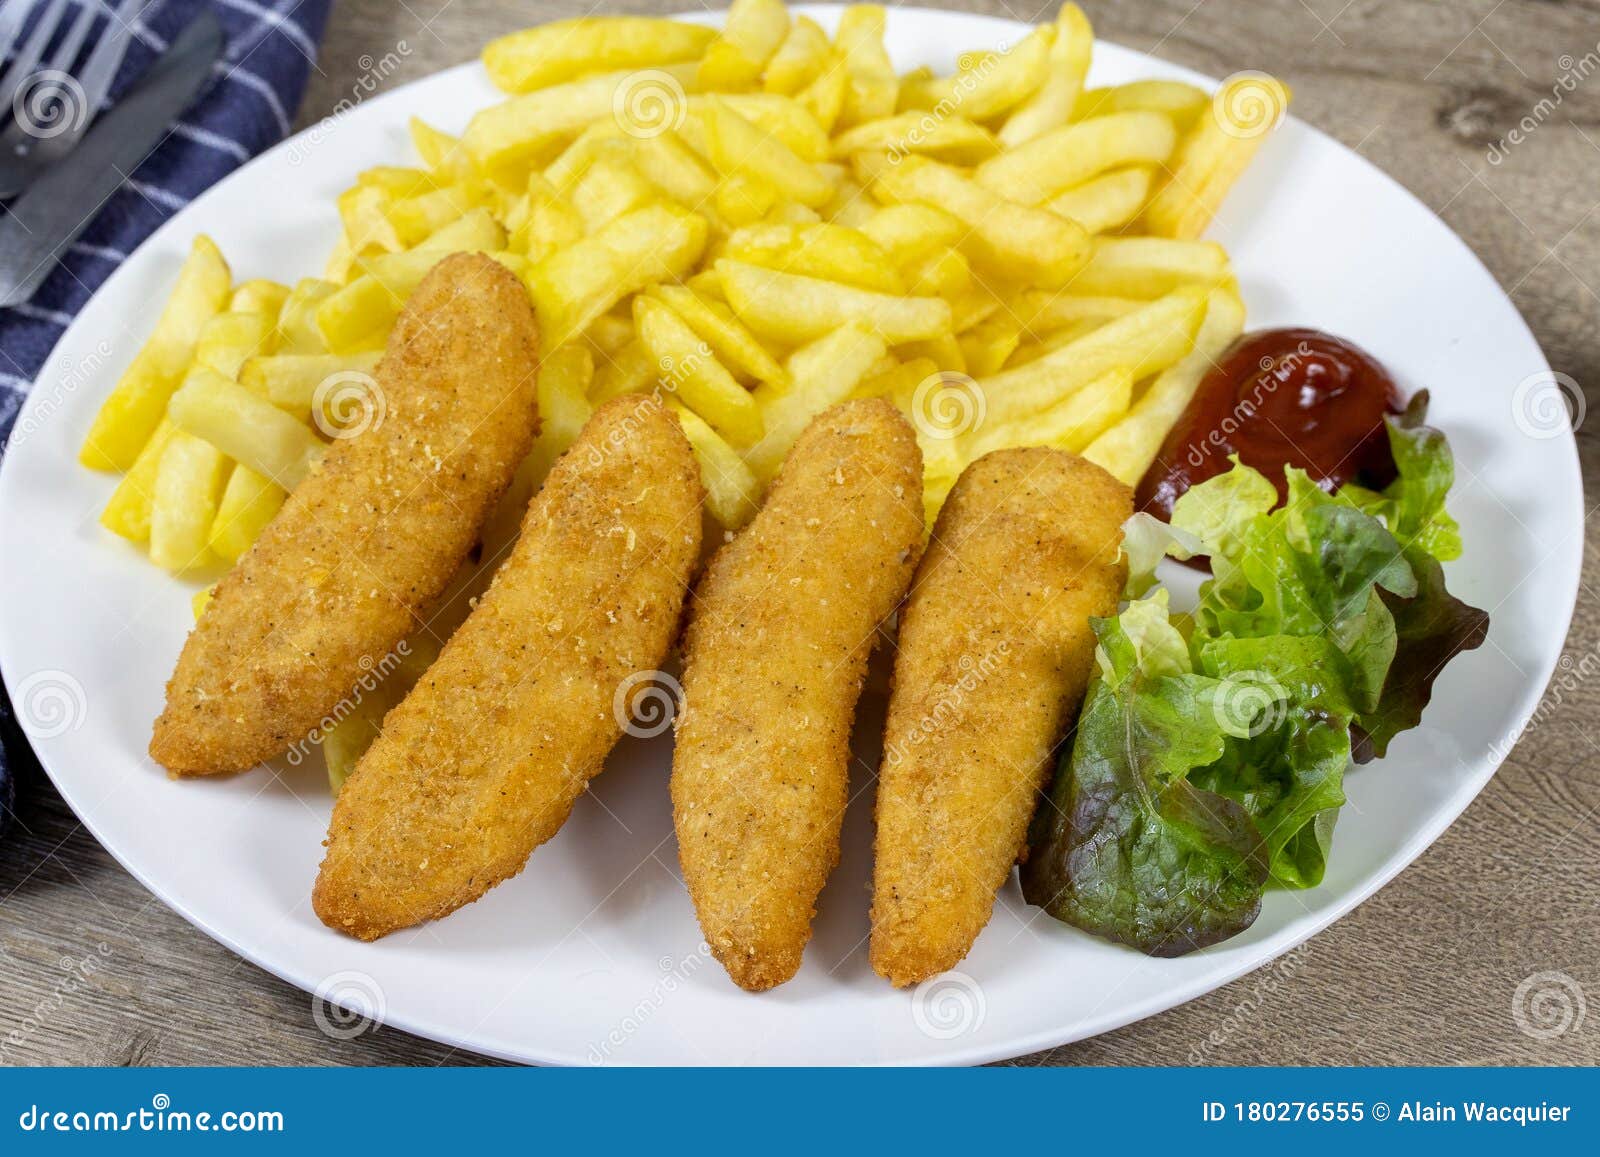 Plate of Breaded Chicken Fillet and Fries Stock Image - Image of cooked ...